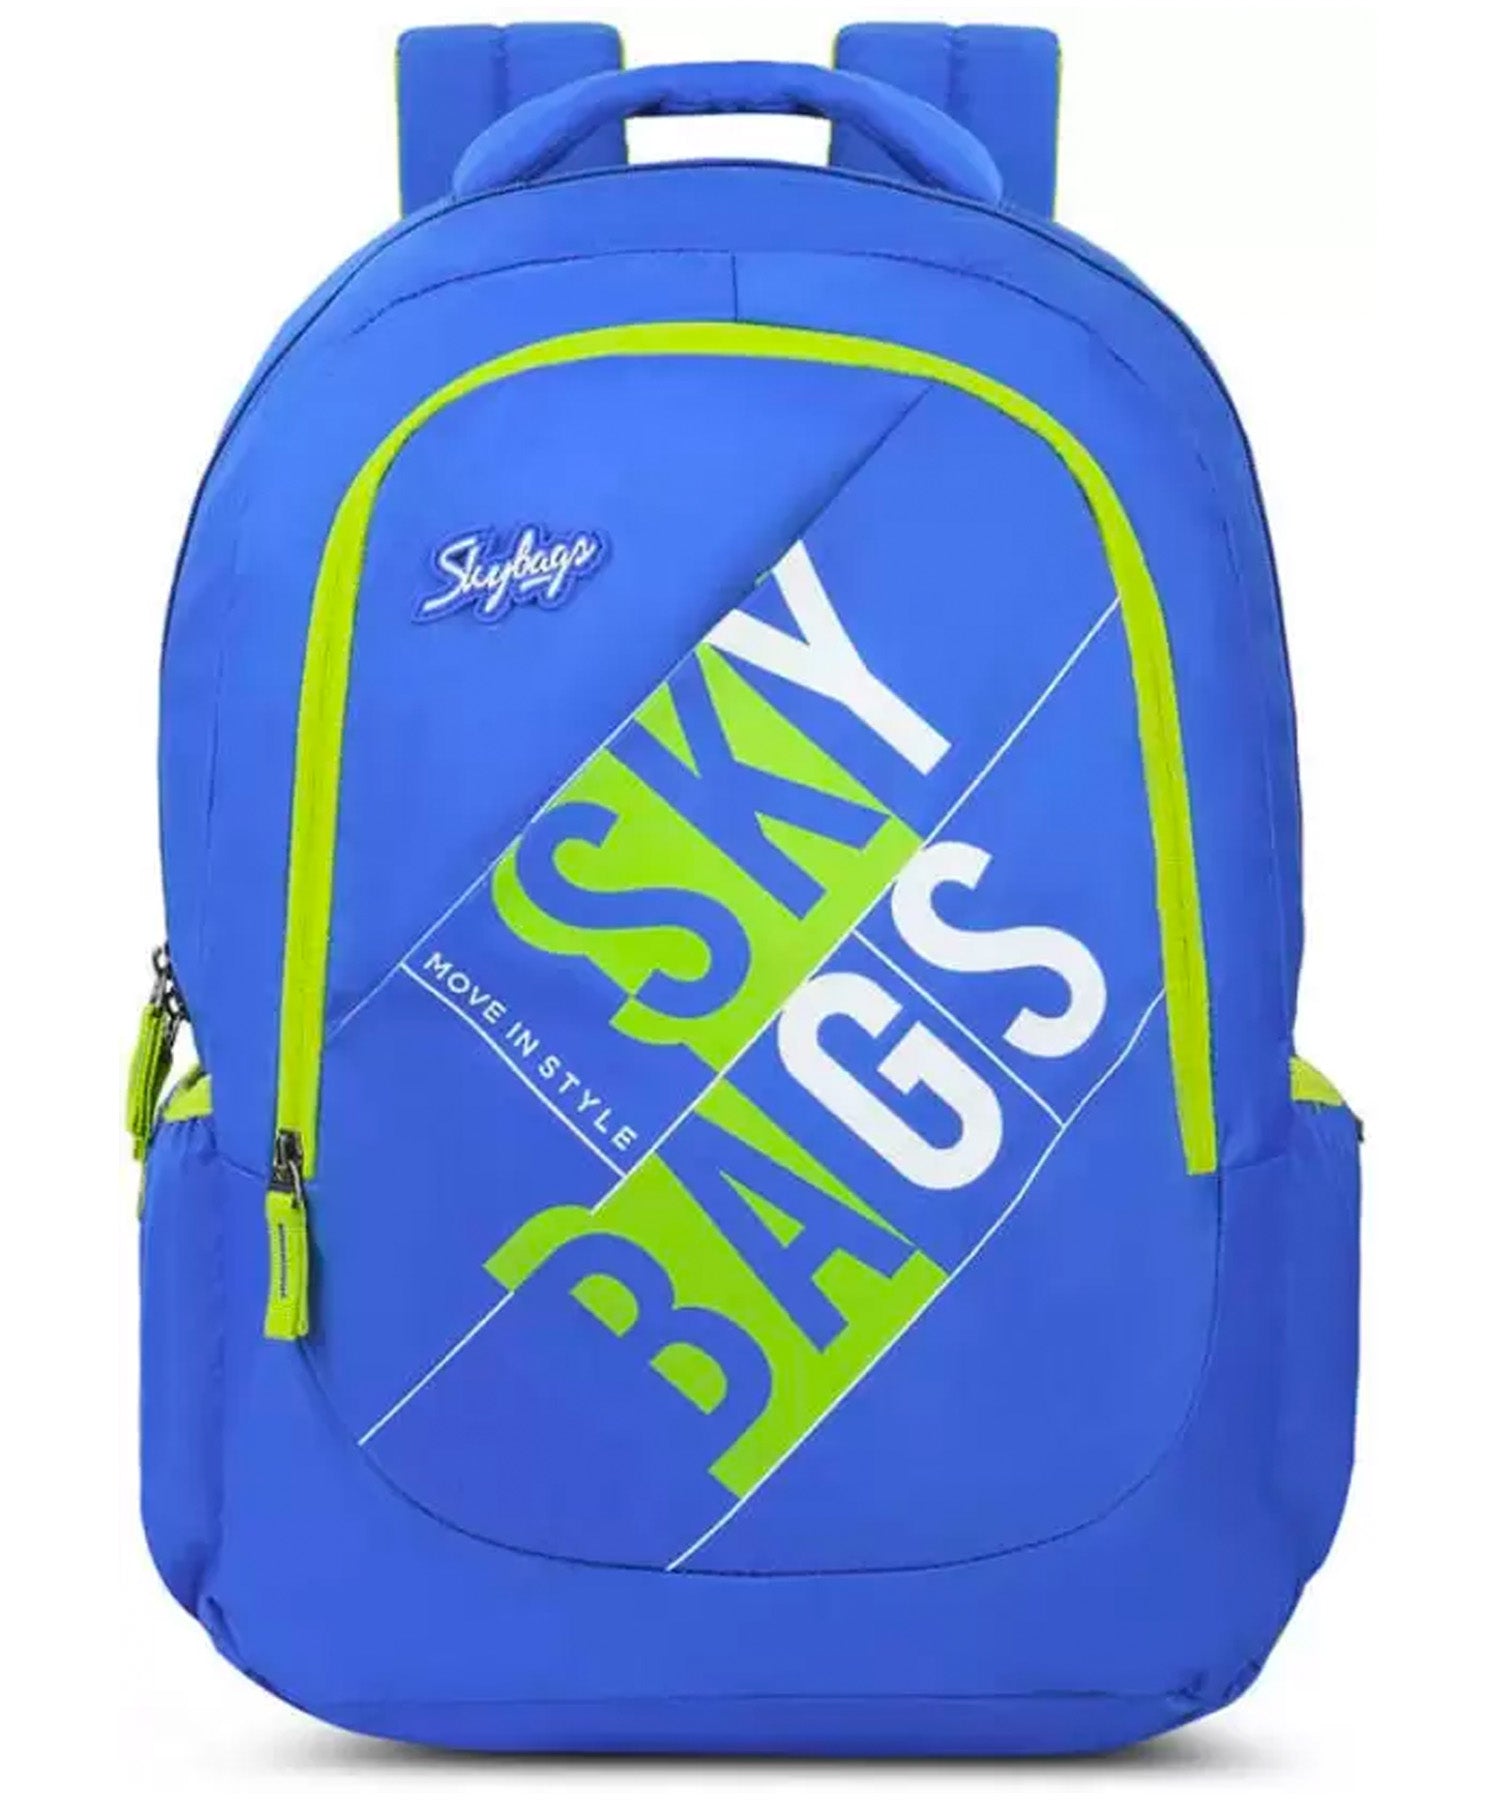 Skybags Backpack - Stylish Blue 28L Capacity